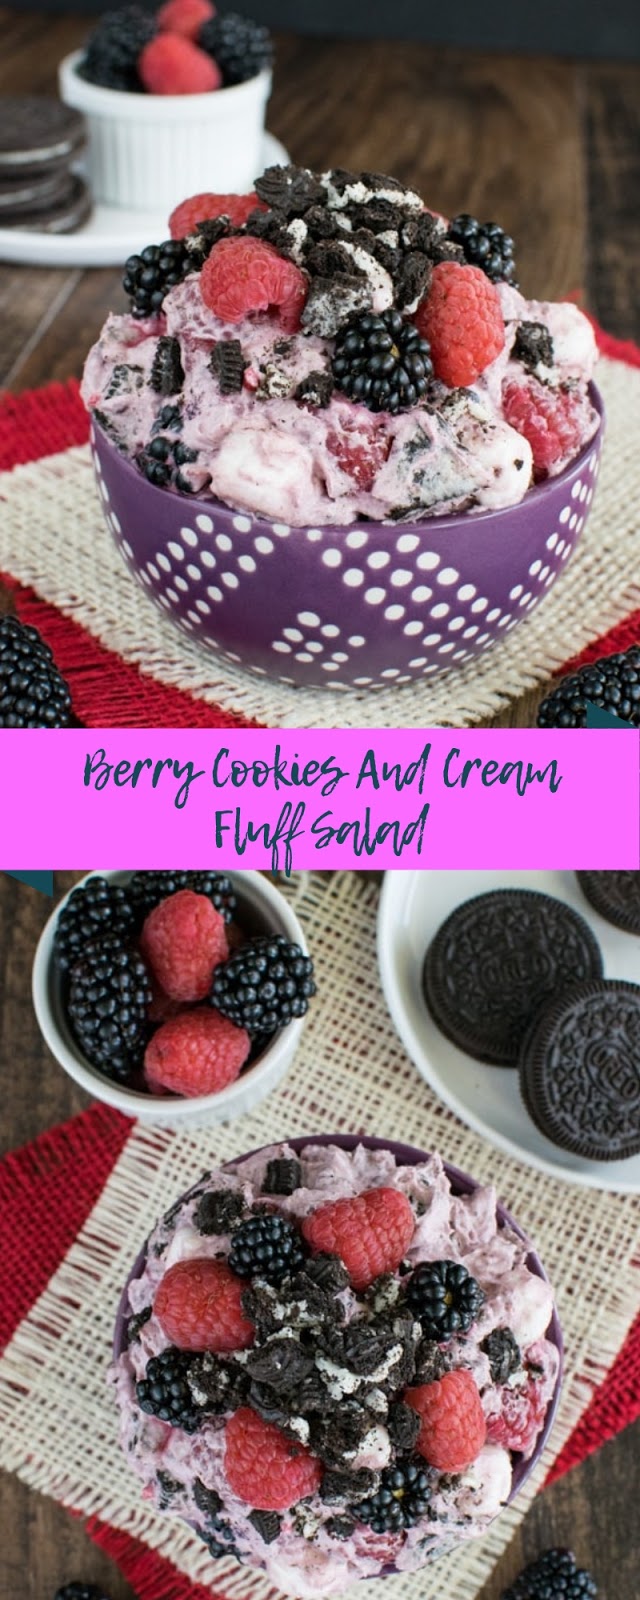 Berry Cookies And Cream Fluff Salad